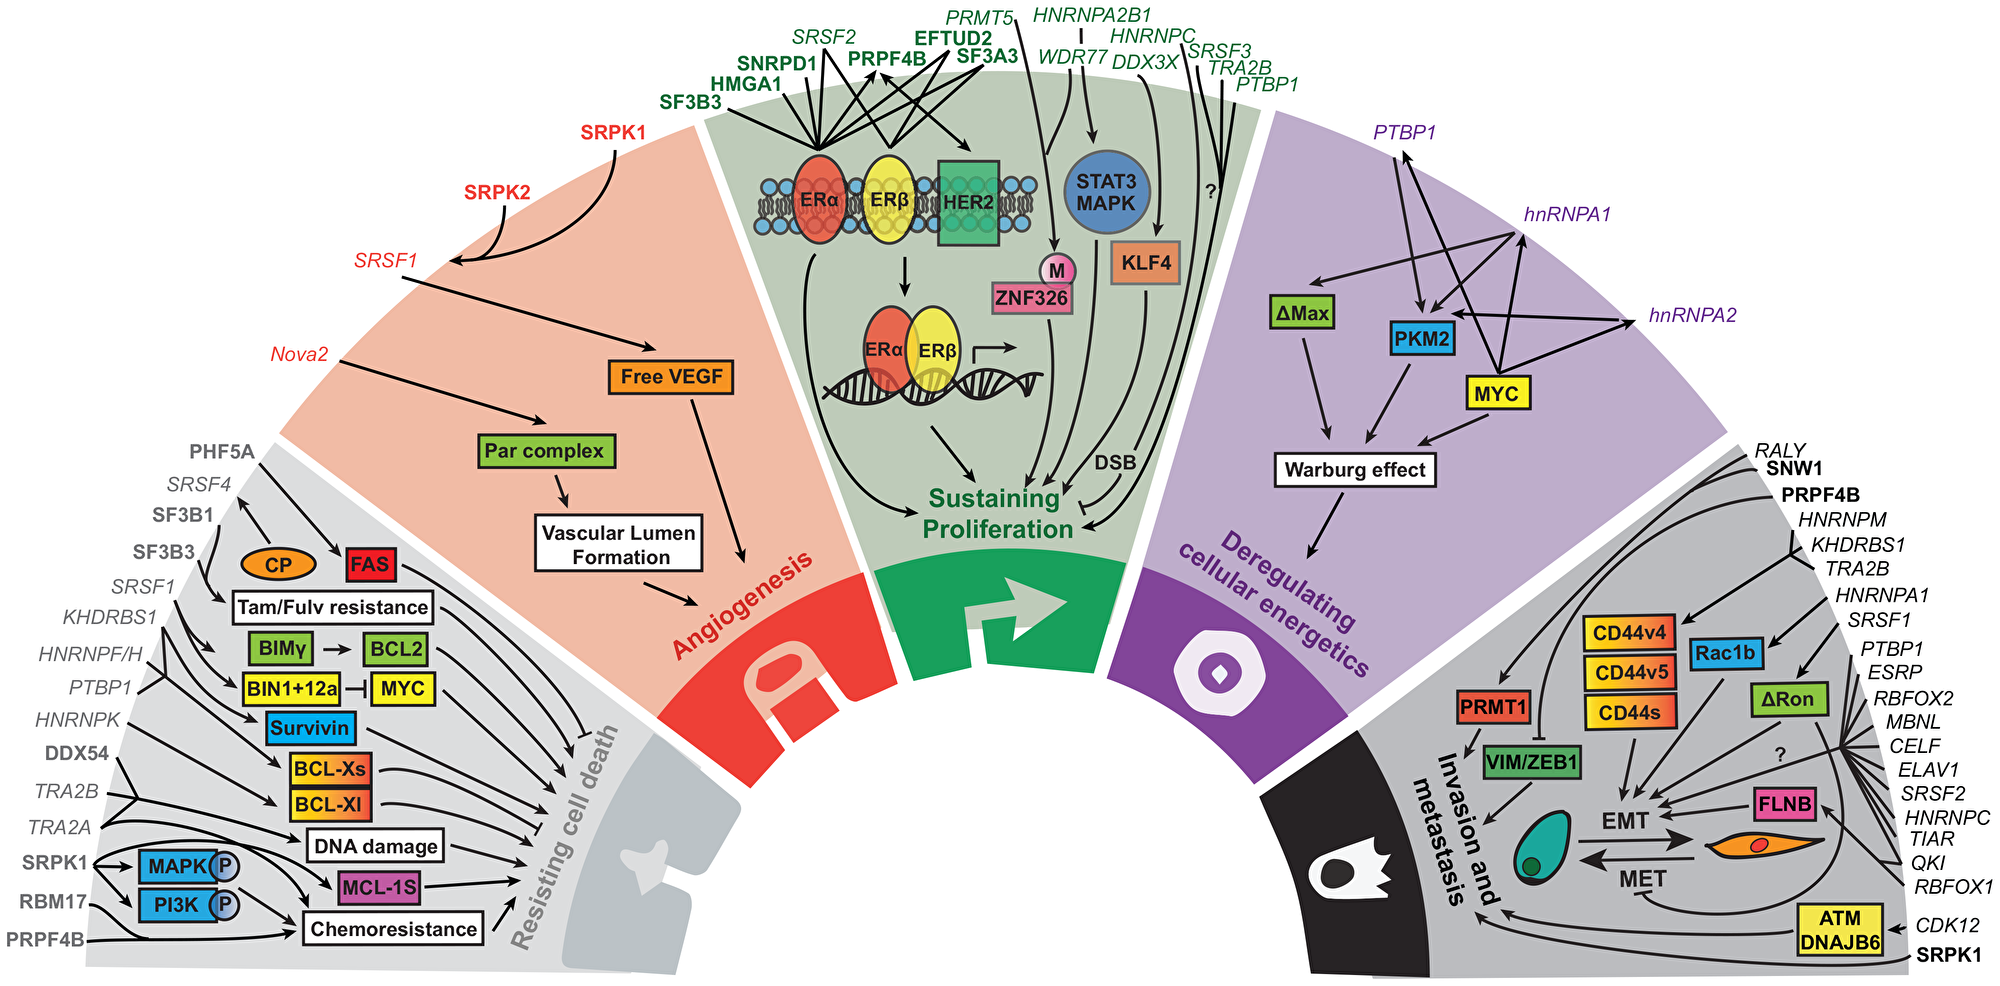 The role of splice factors and their associated pathways in the five hallmarks of cancer.